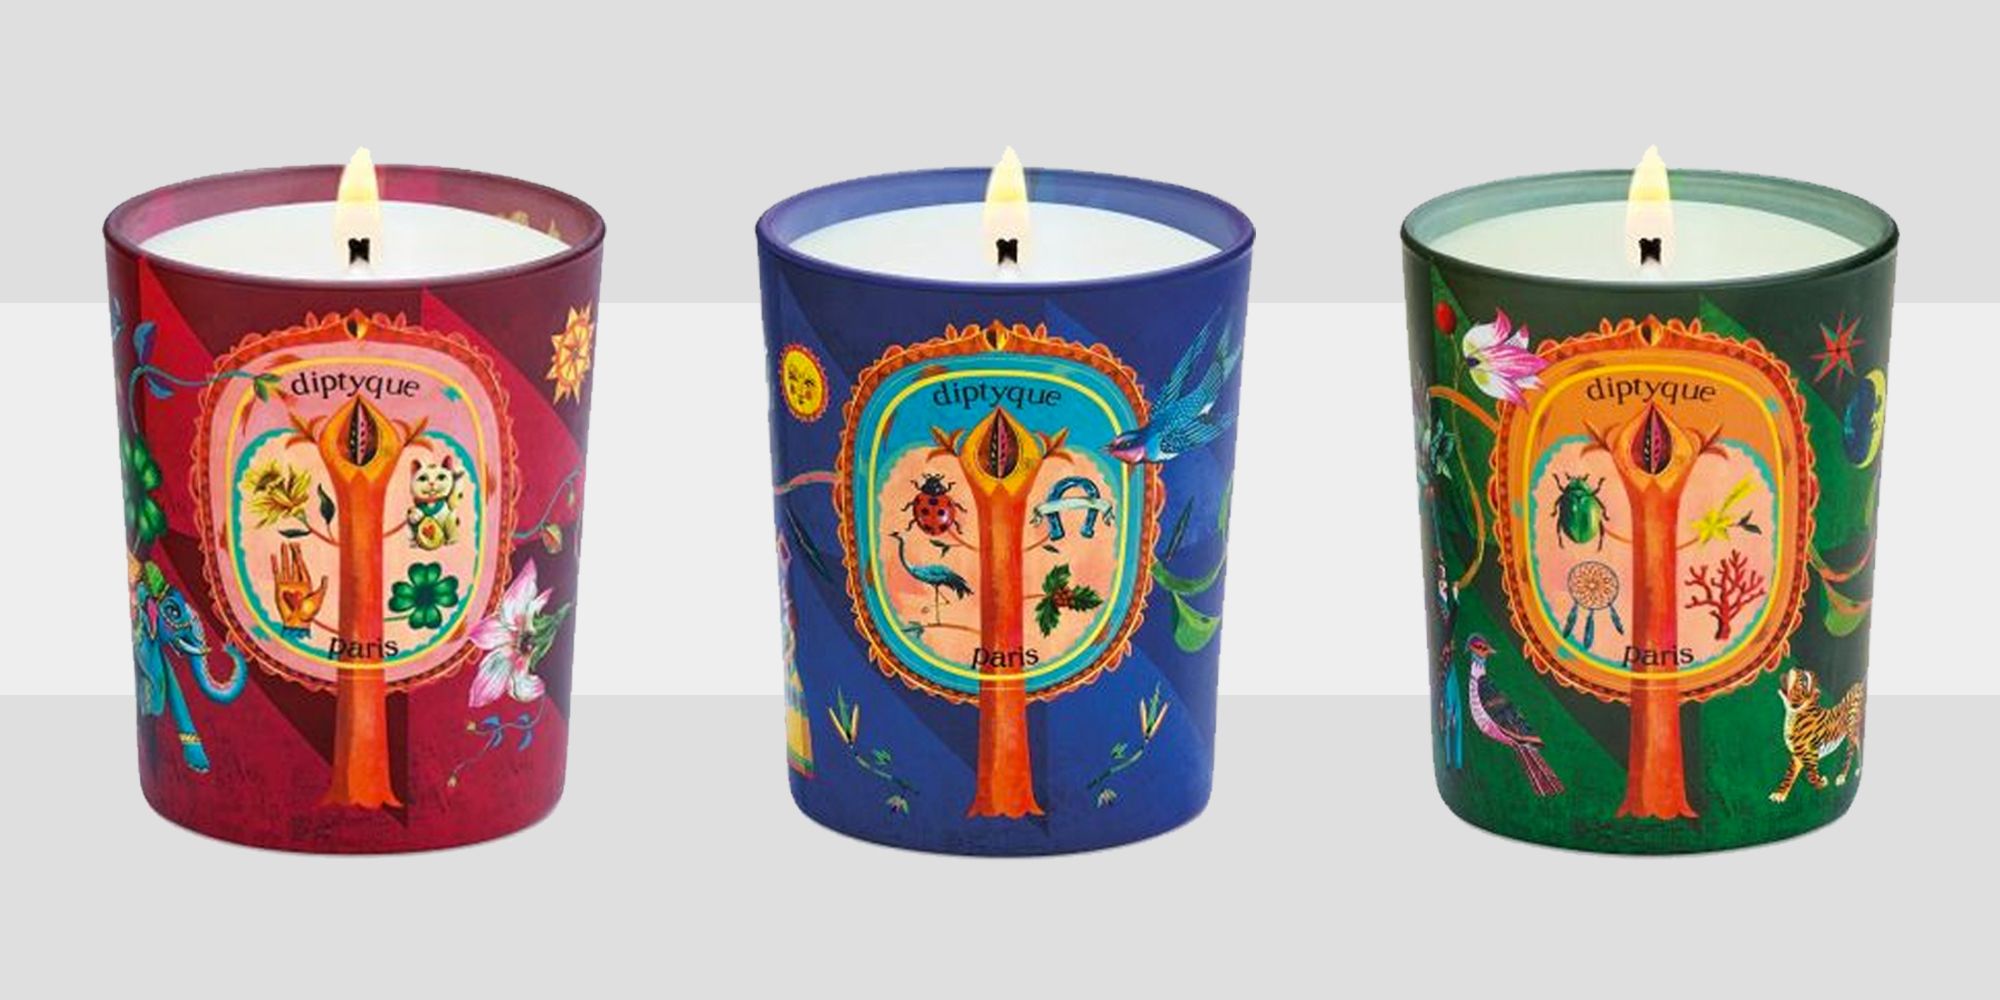 Diptyque's 2019 Holiday Collection - Diptyque Holiday Candles 2019